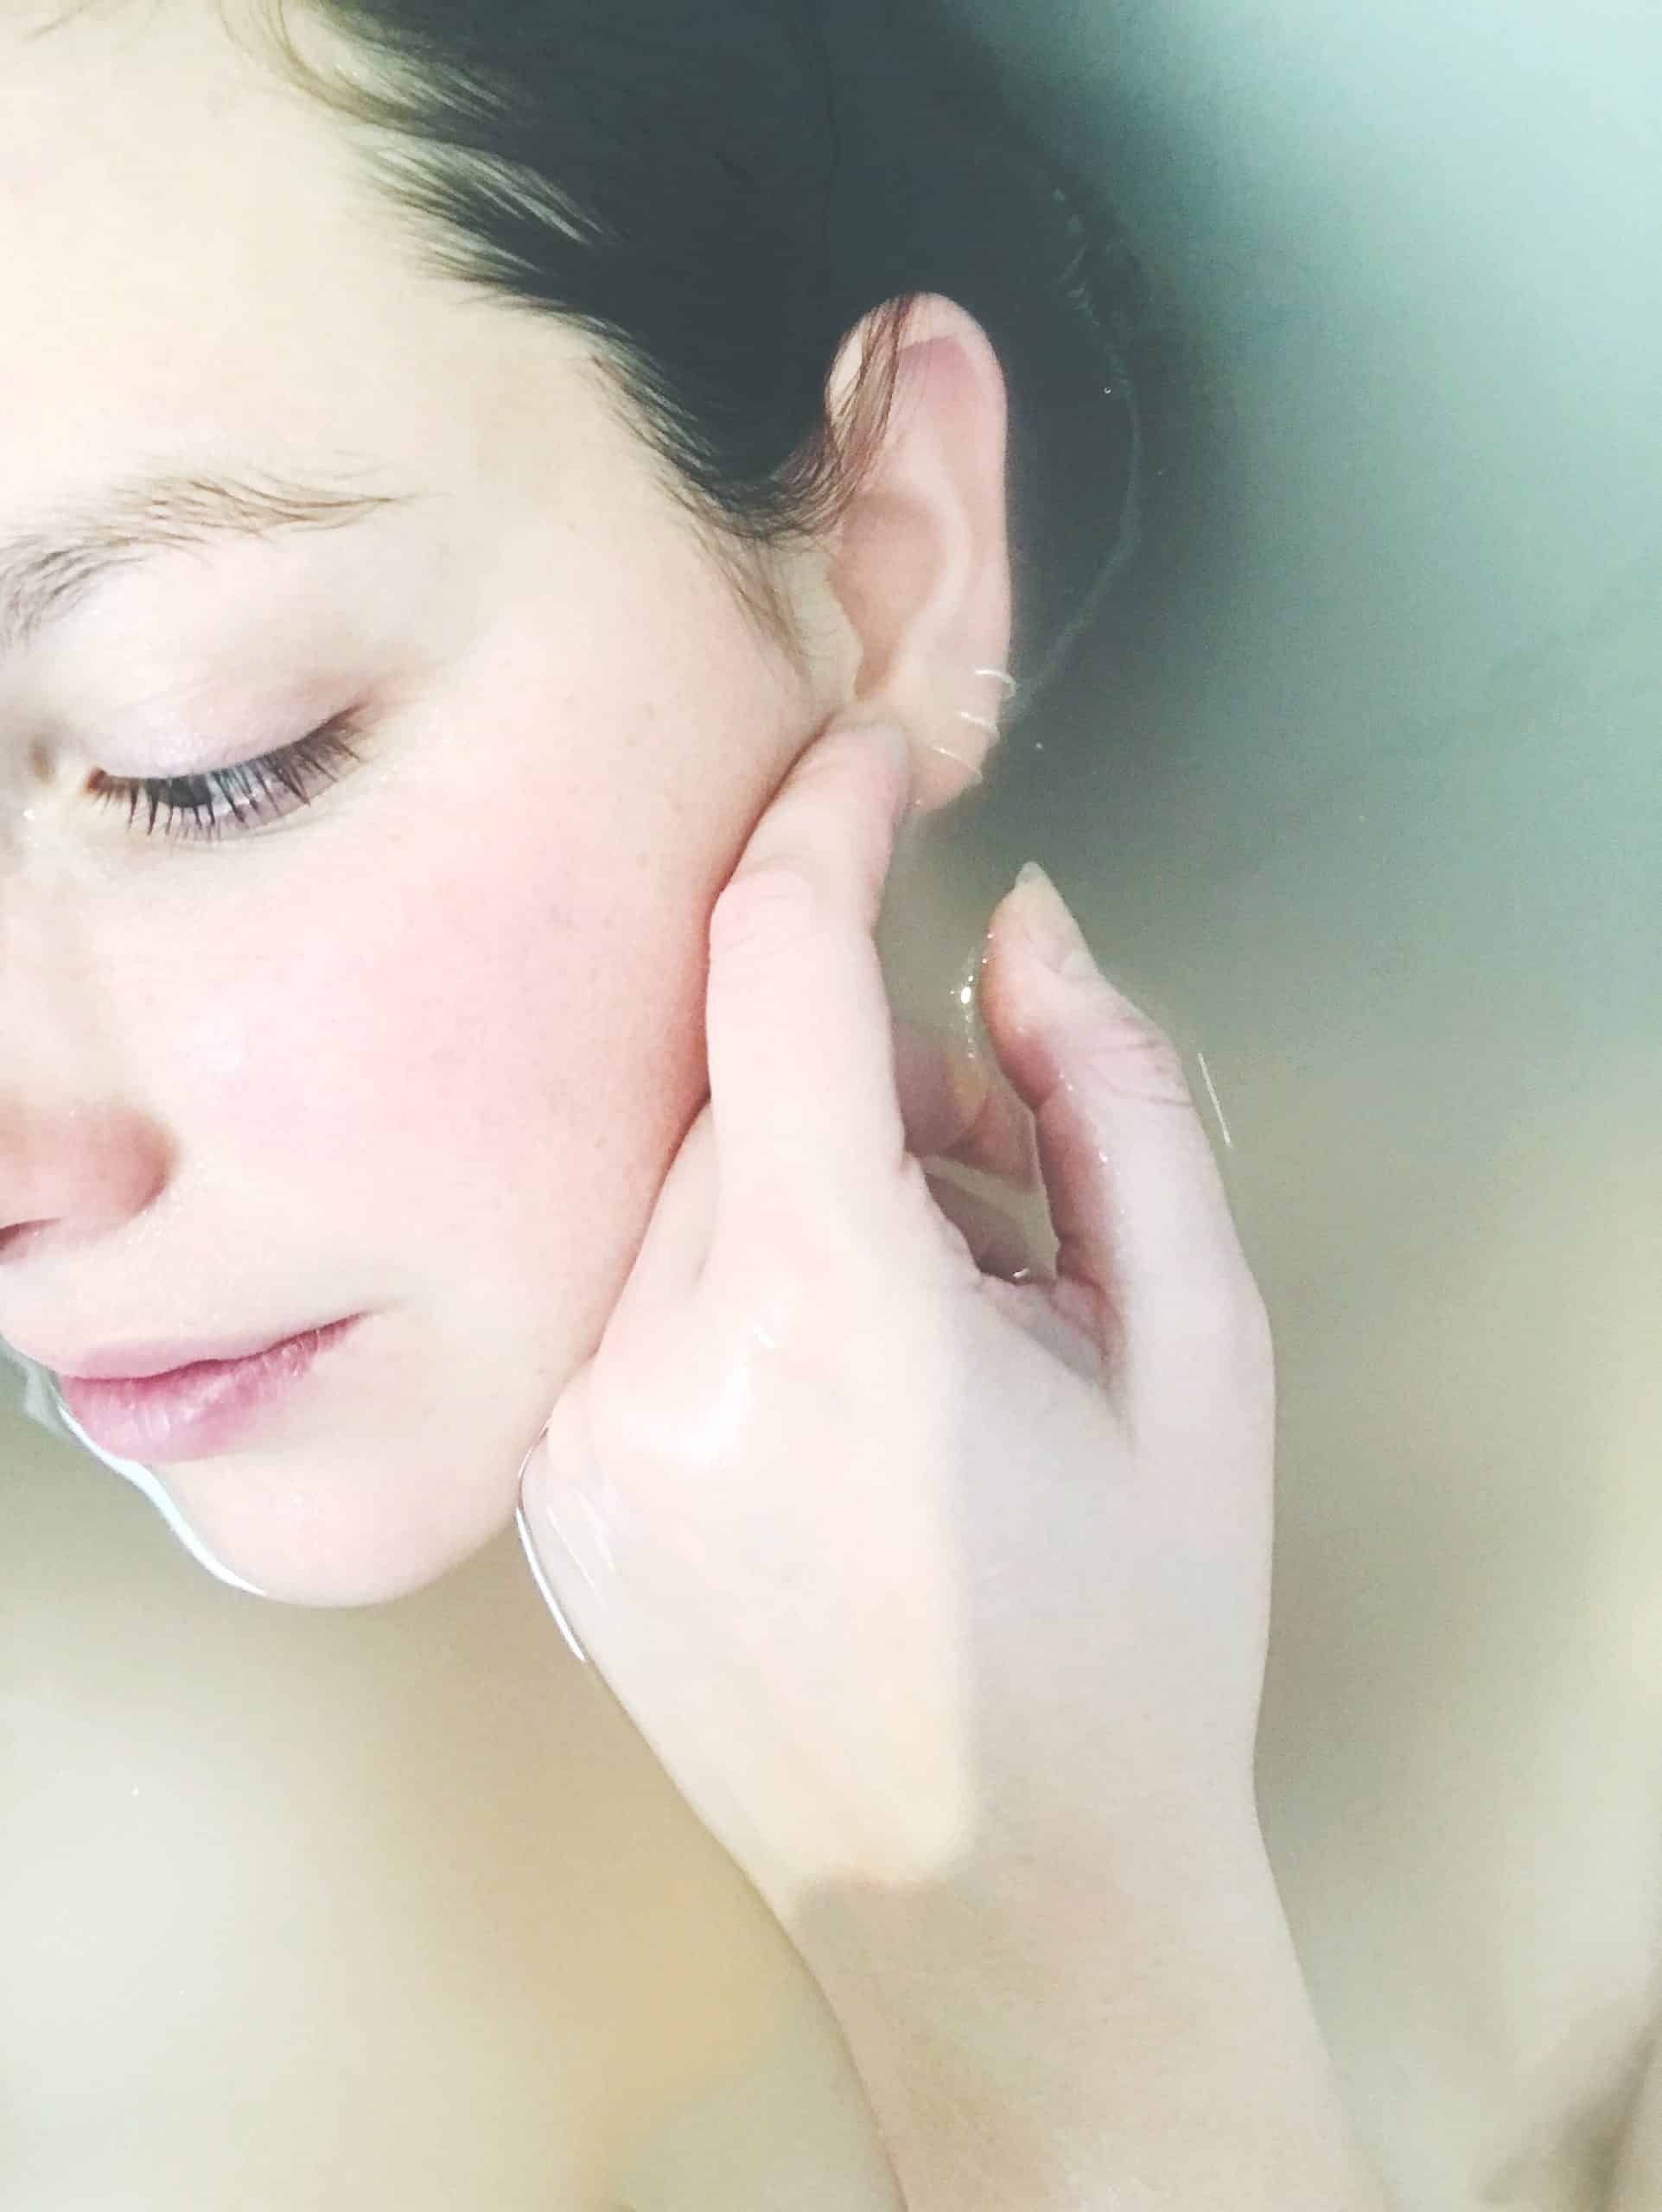 Skin care for the face: how to clean it